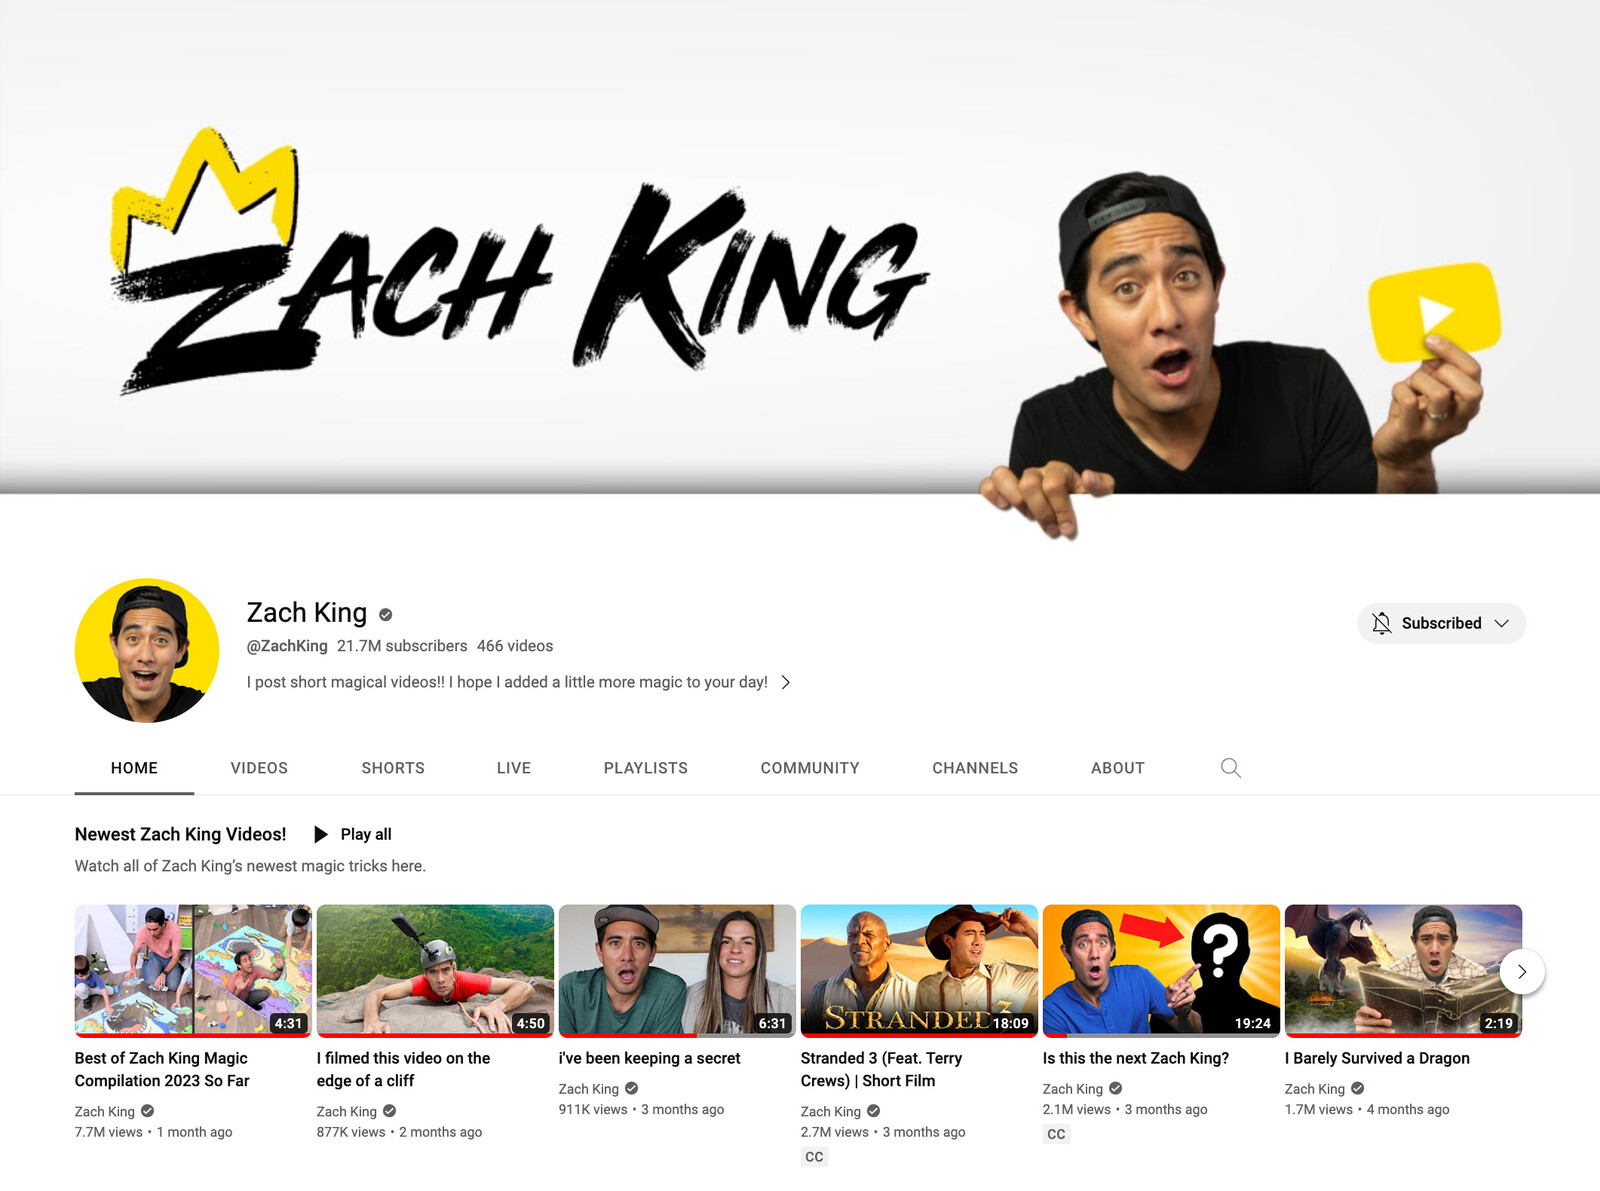 Zach King's YouTube page incorporating the name design:  https://www.youtube.com/@ZachKing/featured